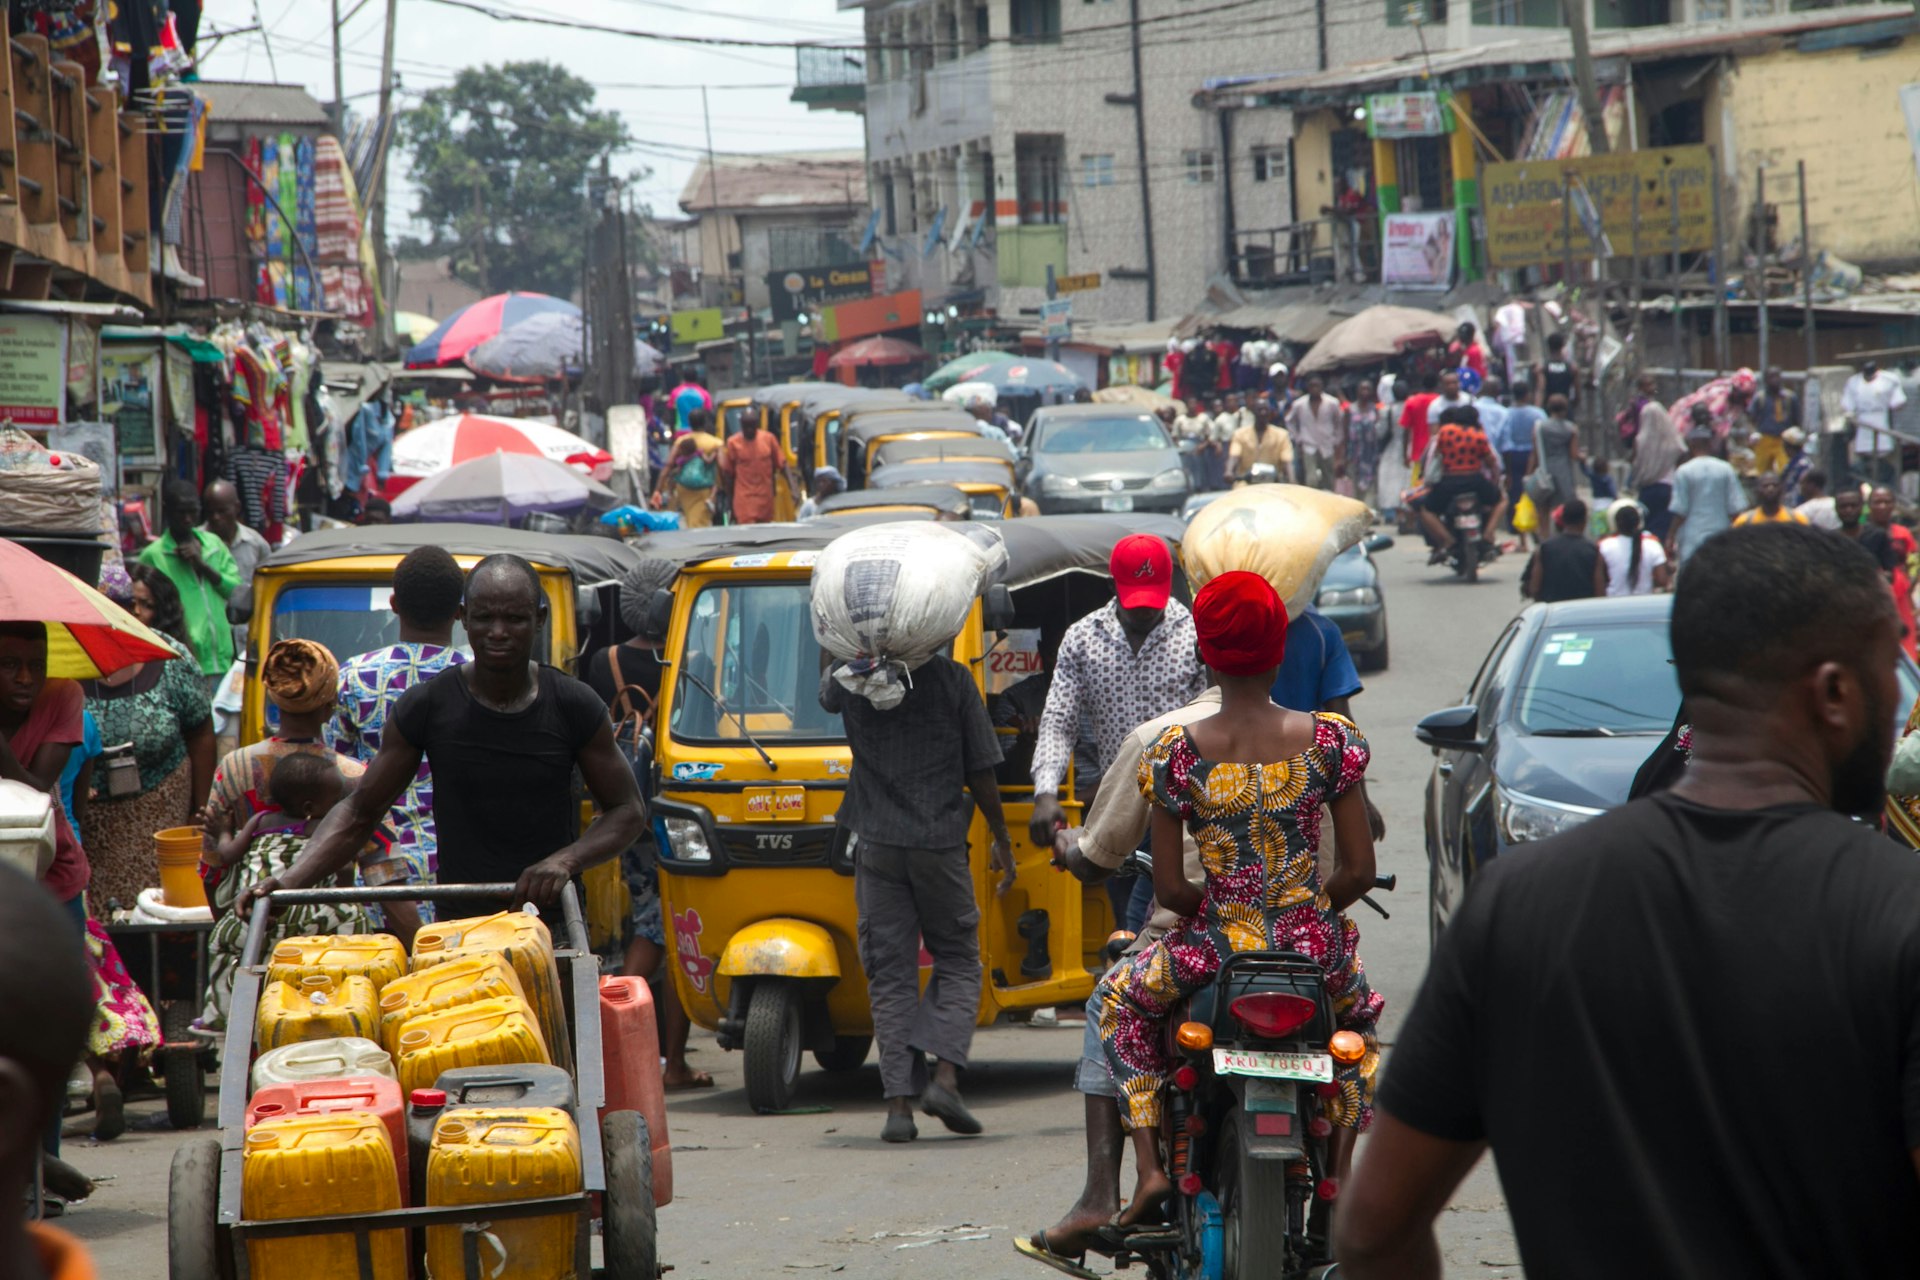 A busy street scene with lots of traffic in Ajegunle City, Lagos, Nigeria